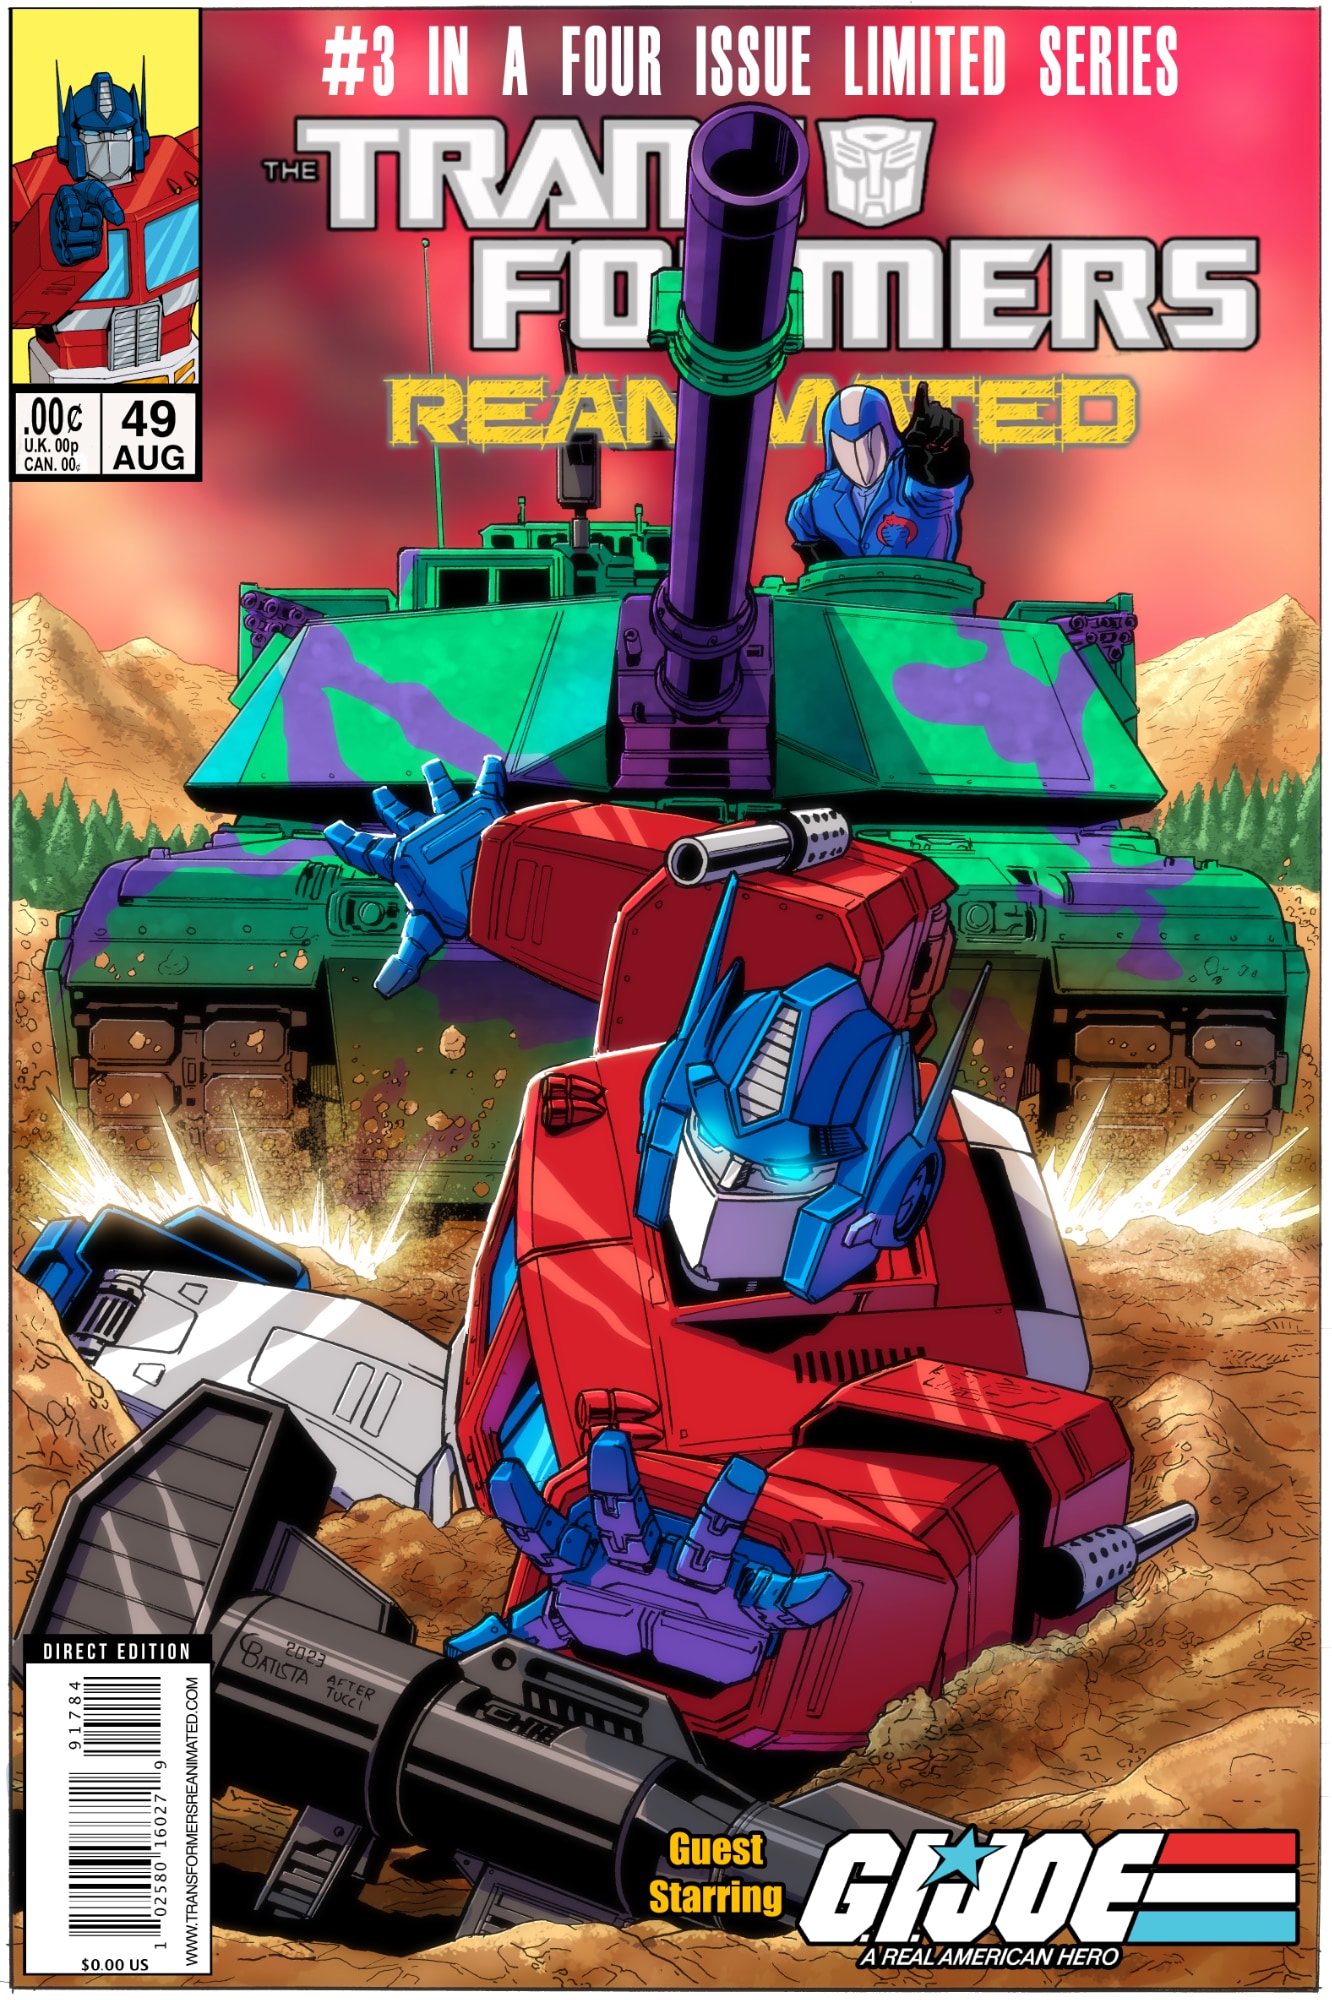 Transformers comic cover with Optimus Prime in the mud crawling to his Ion Blaster with Megatron in tank mode coming up behind him